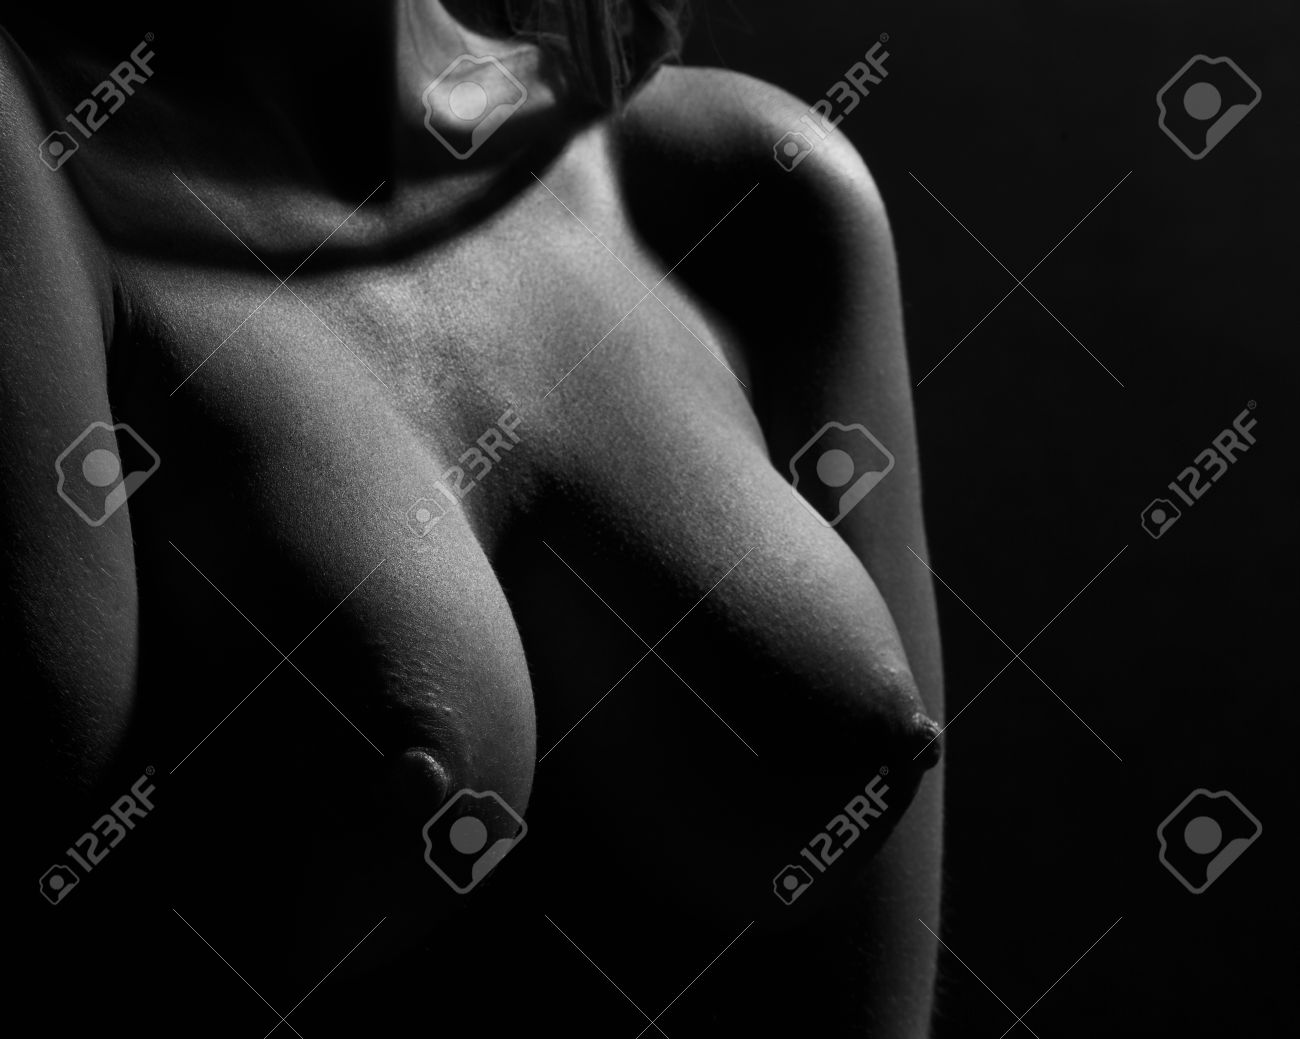 Erotic black and white nude